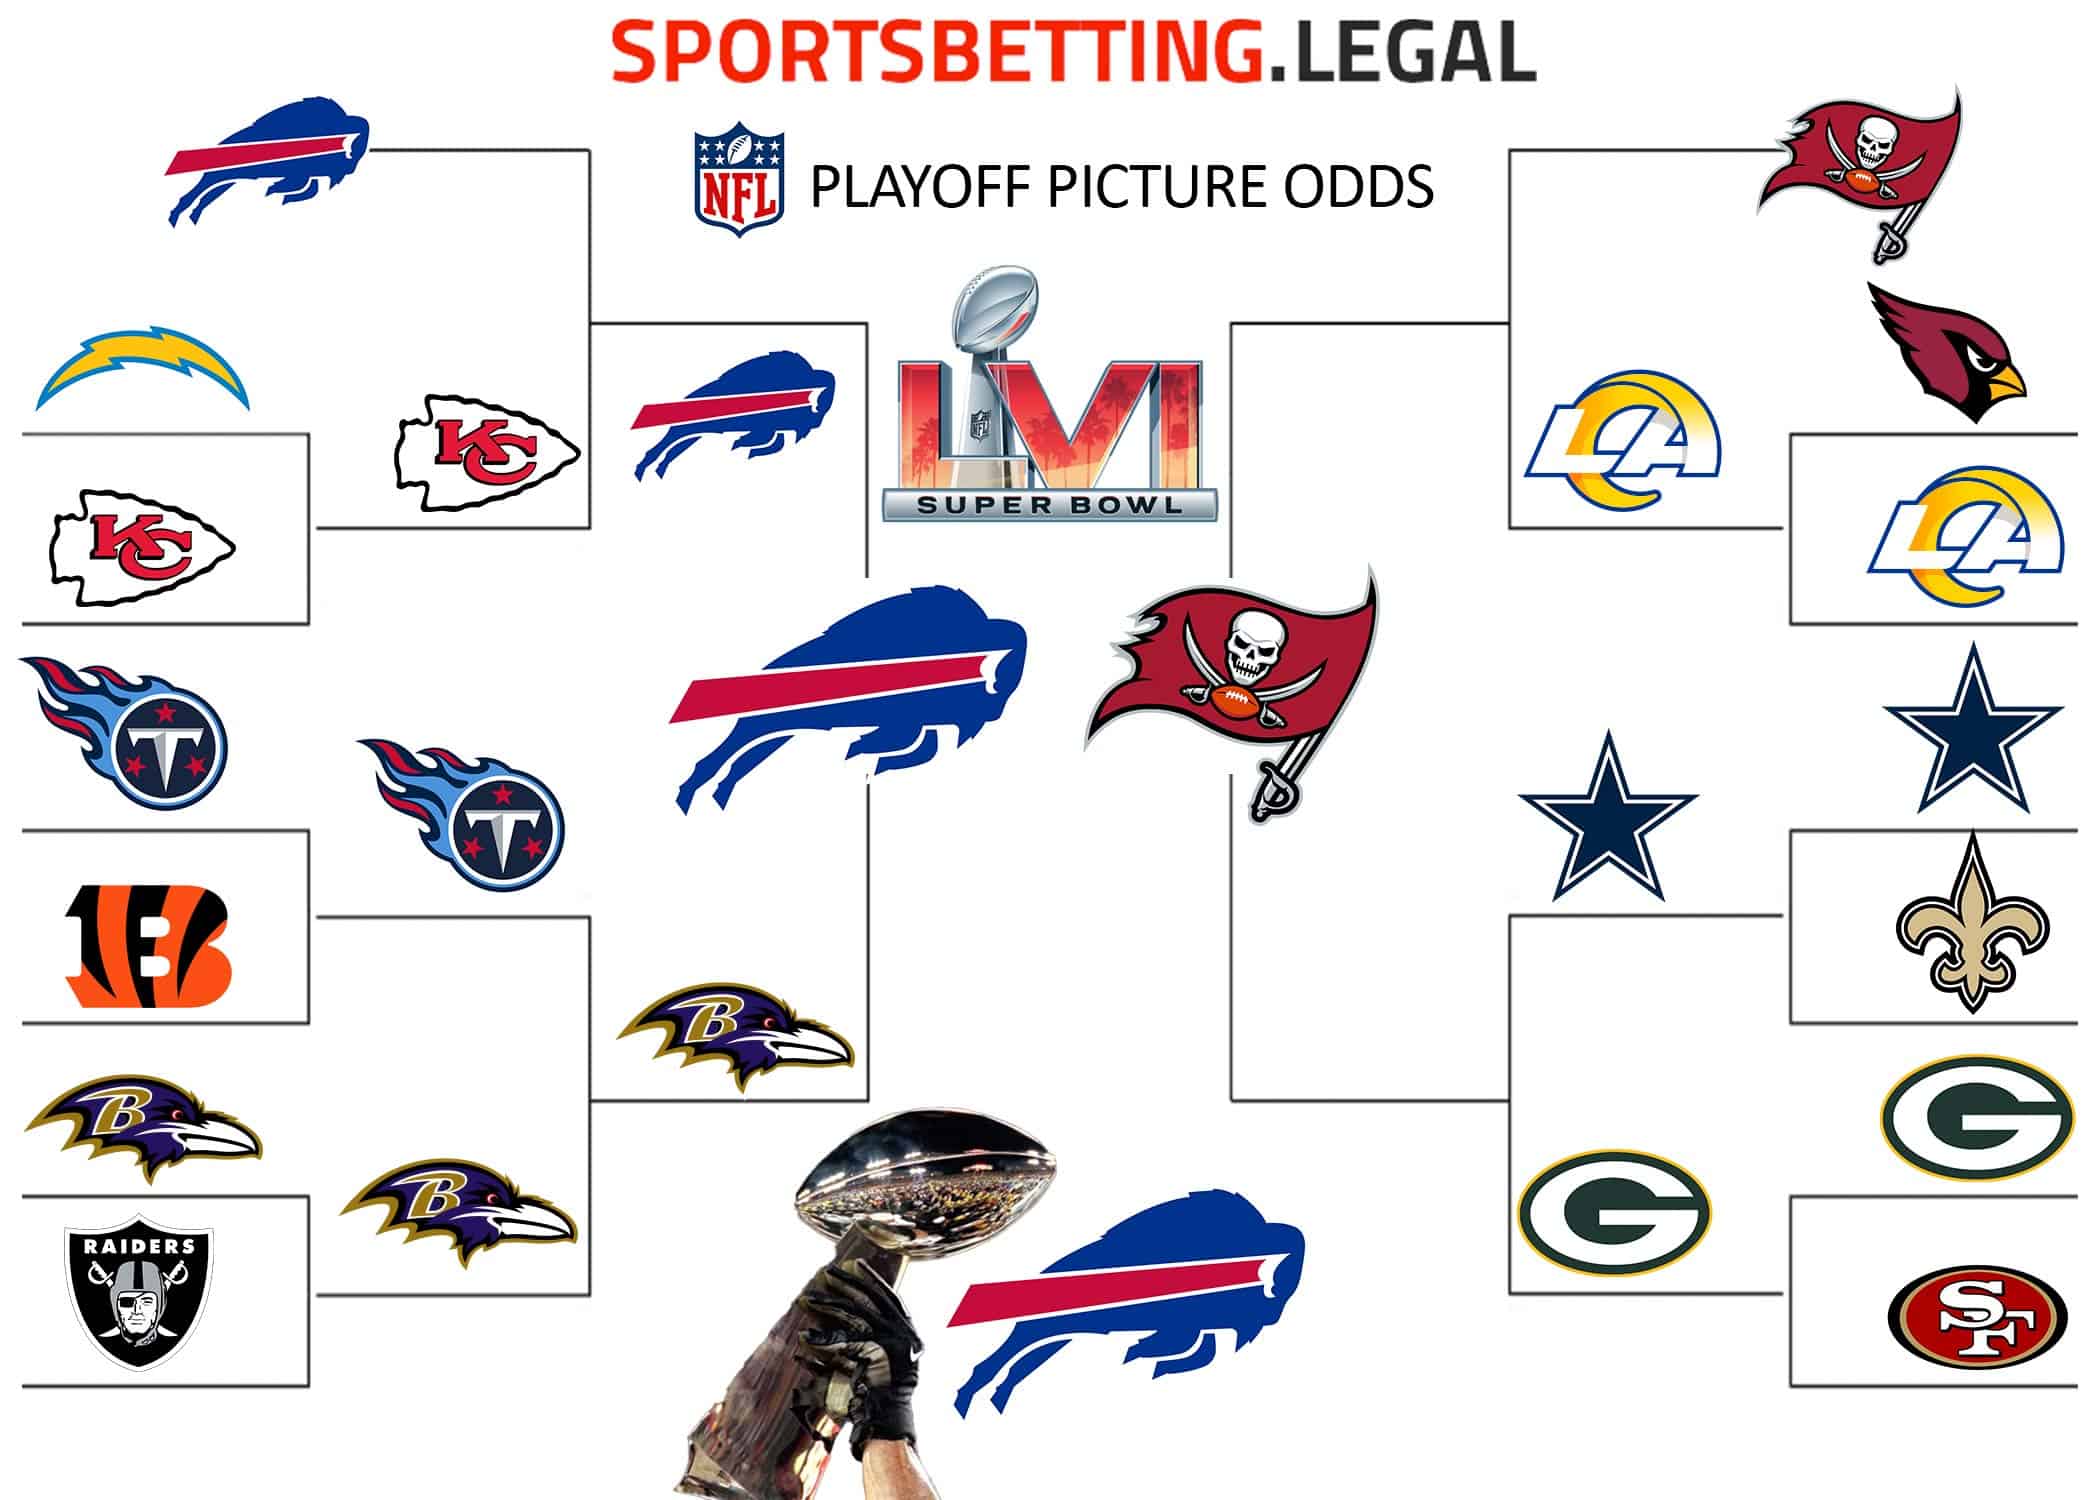 2021-22 bracket for playoff odds after week 8 NFL betting